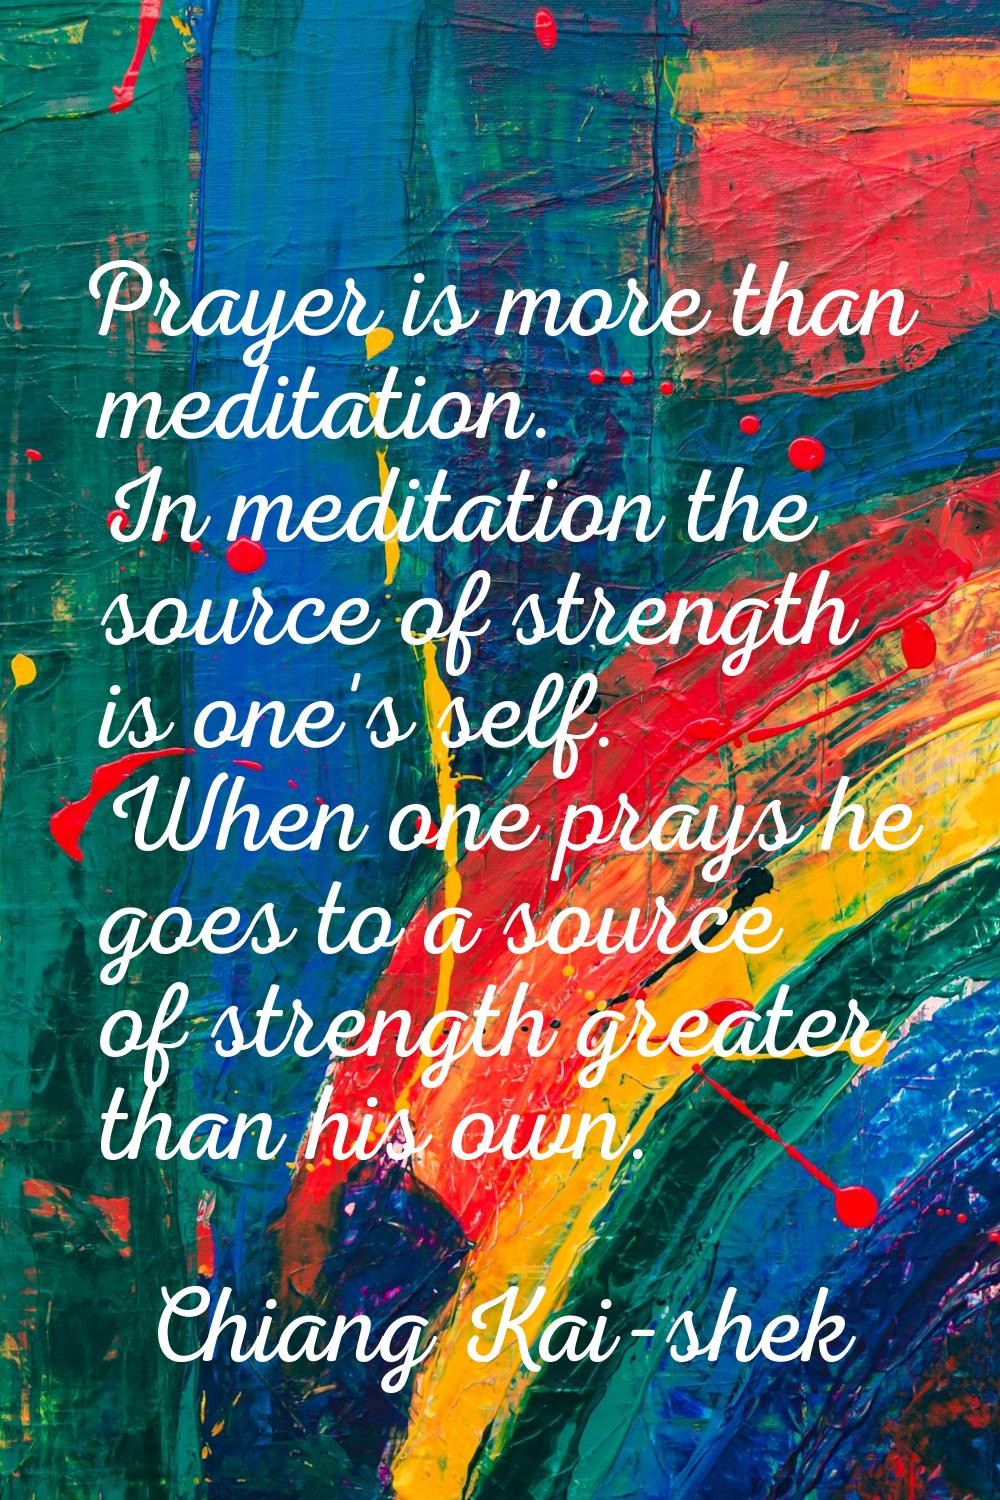 Prayer is more than meditation. In meditation the source of strength is one's self. When one prays 